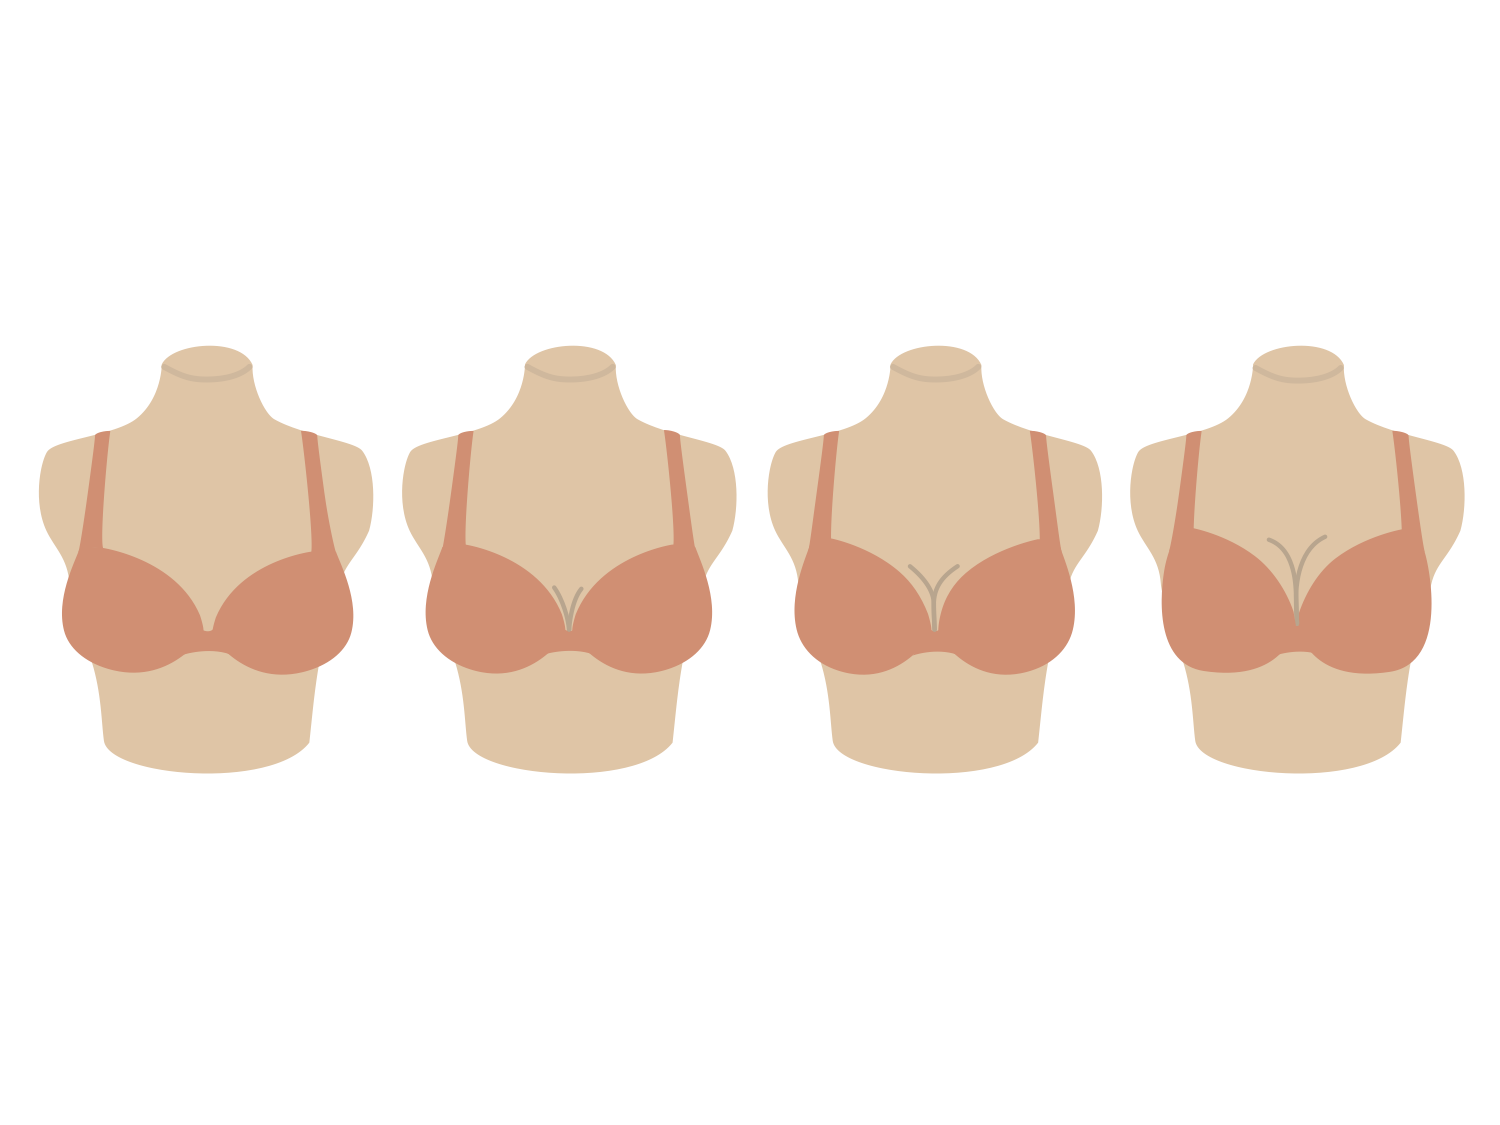 Step by step: determine your sister bra size